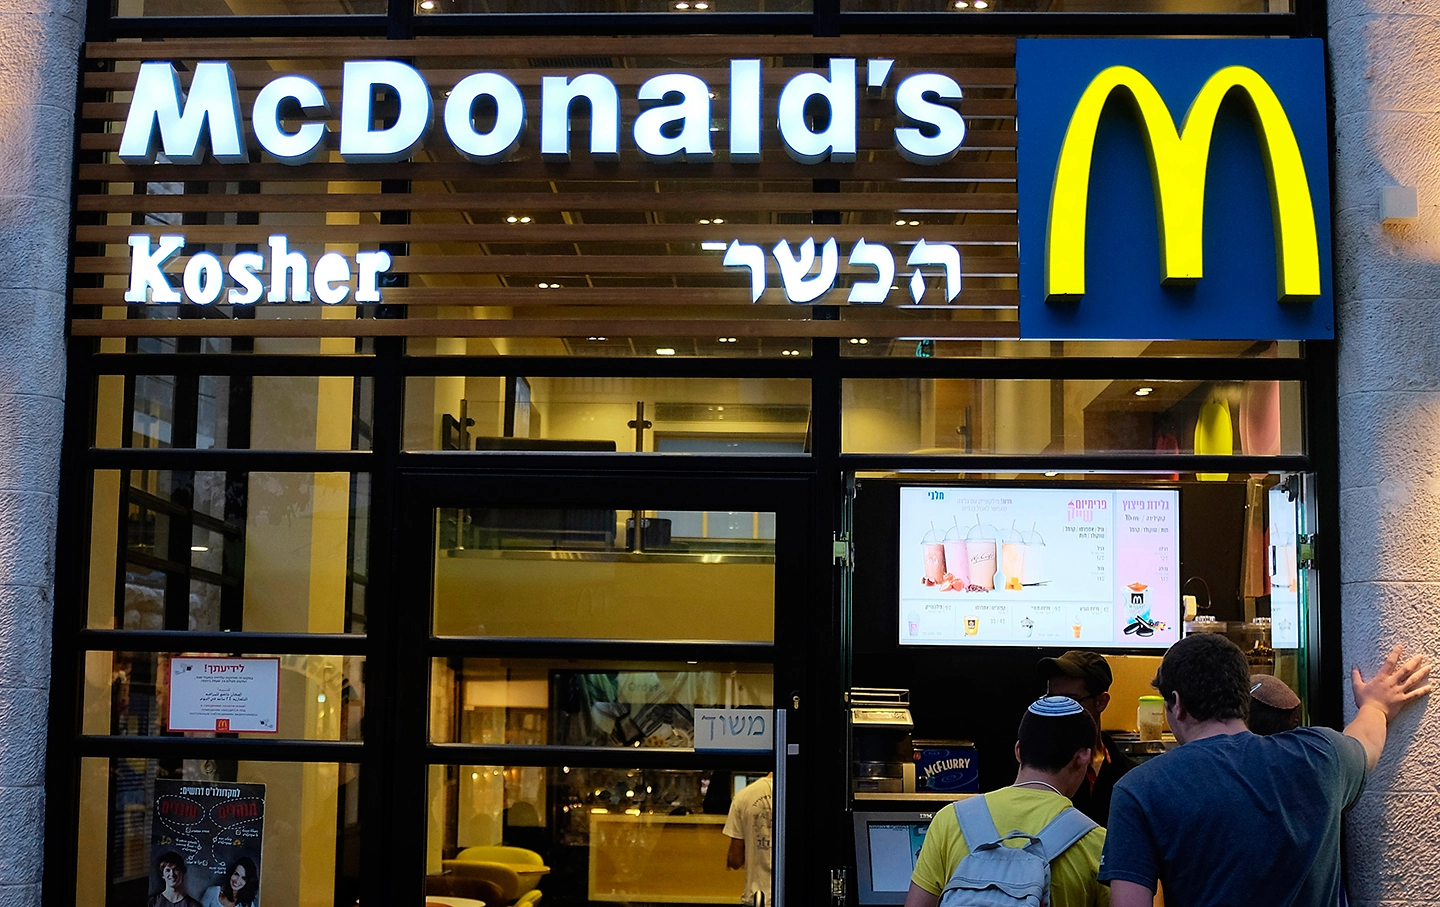 mcdonalds-faces-boycott-for-donating-free-meals-to-israeli-forces-amid-hamas-israel-conflict